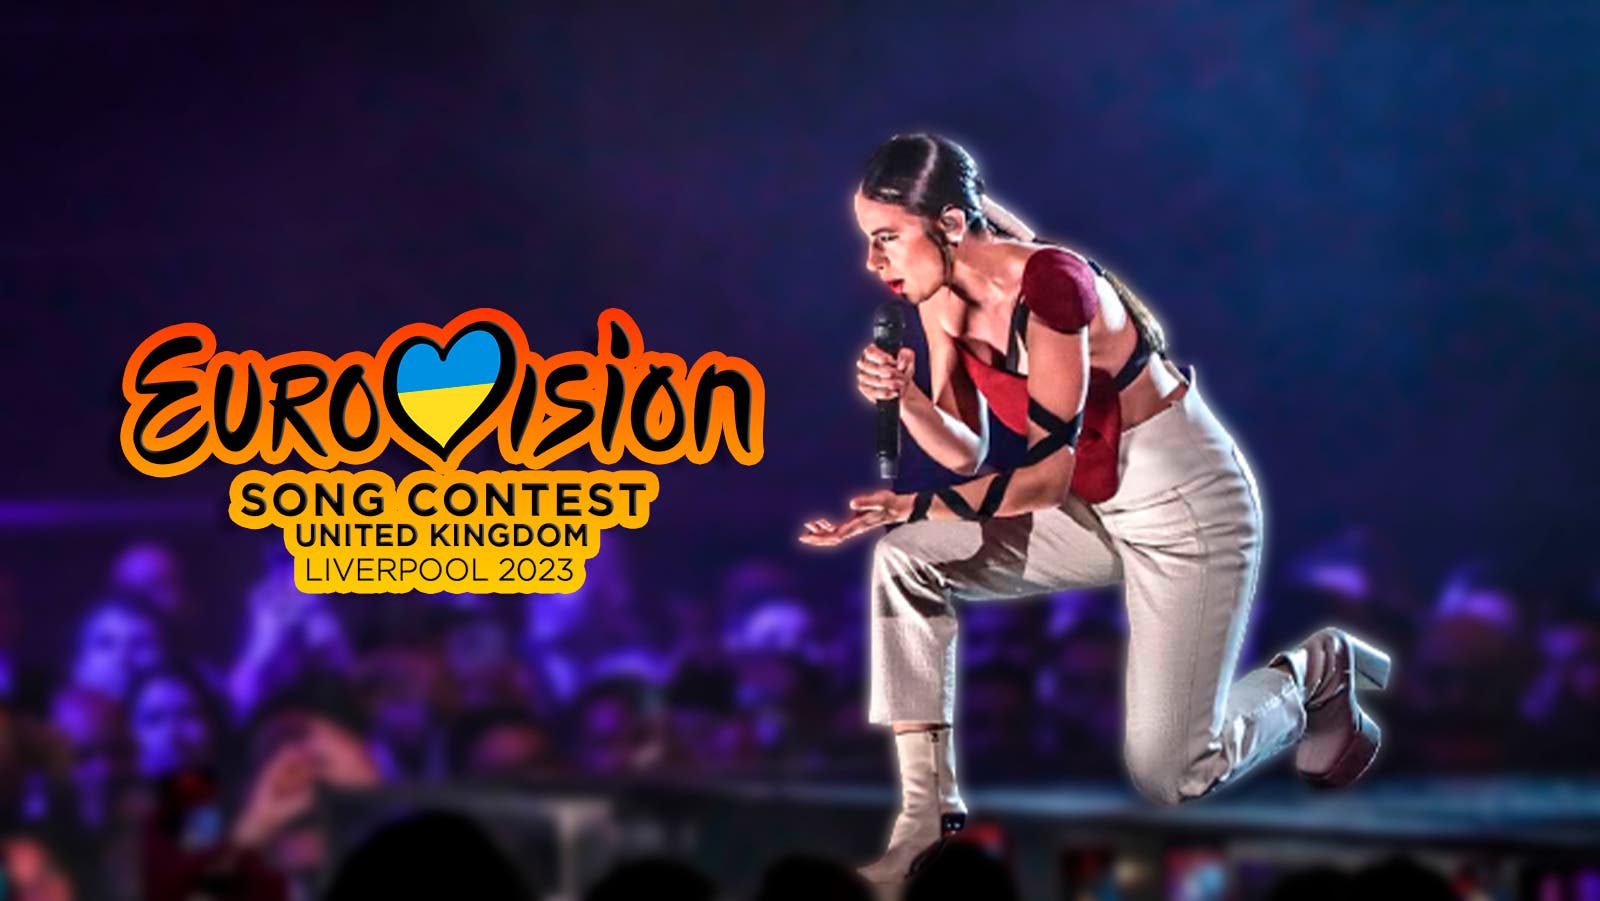 Spain’s real chances of winning Eurovision 2023: Blanca Paloma one of the favorites